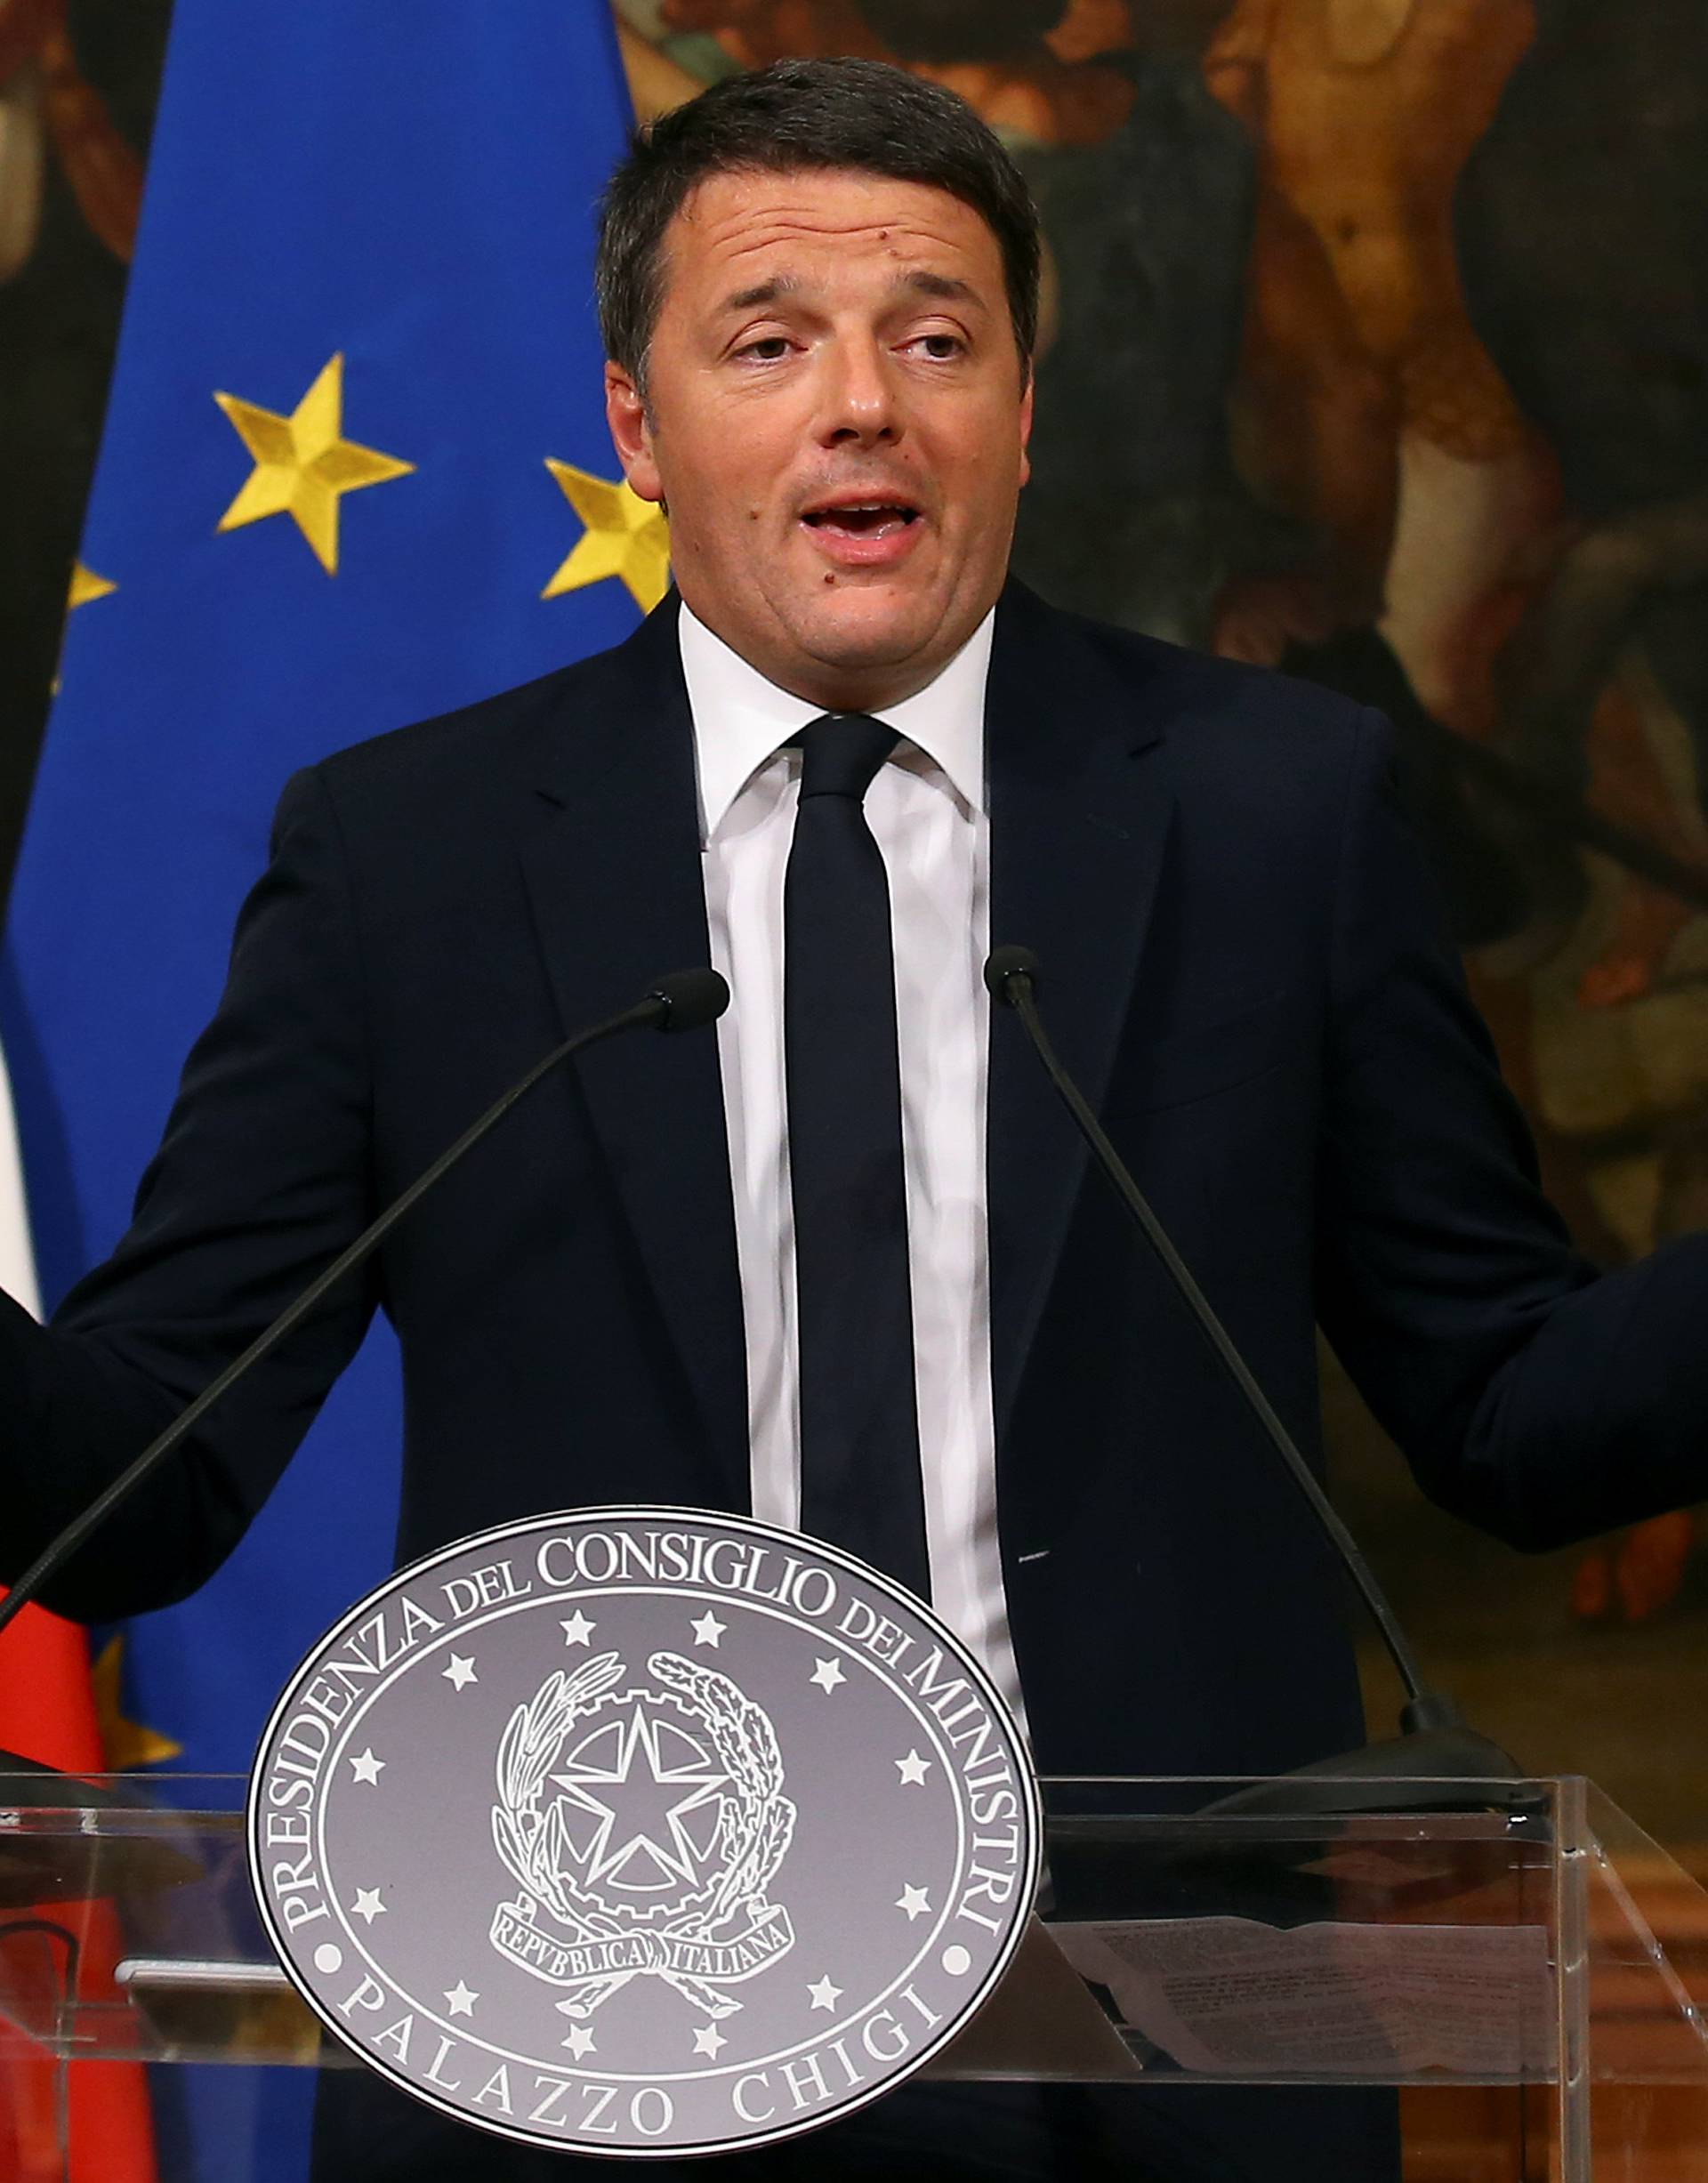 Italian Prime Minister Matteo Renzi speaks during a media conference after a referendum on constitutional reform at Chigi palace in Rome